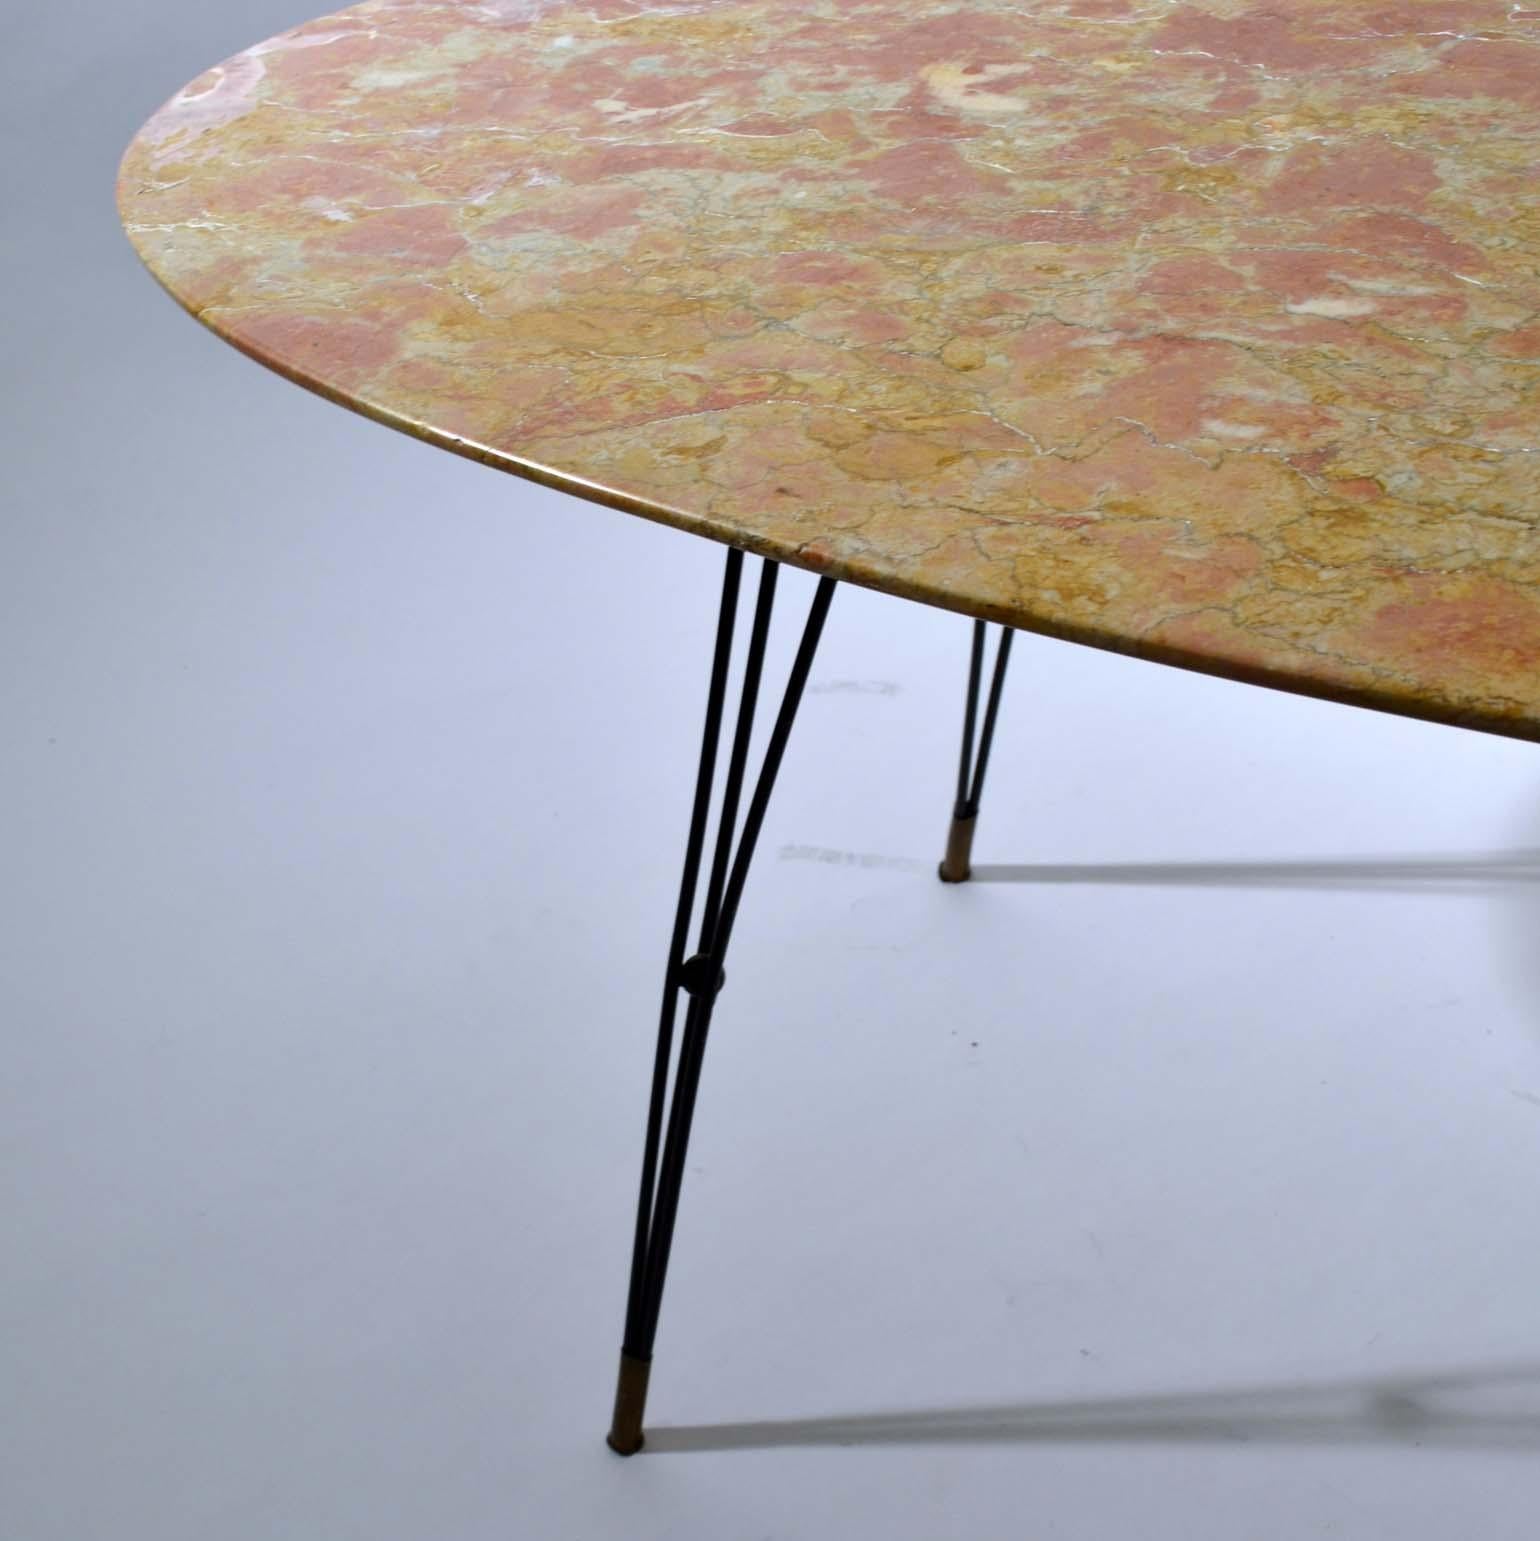 Mid-Century Modern Oval Marble Cocktail Table on Black Spider Legs Italian, 1950s For Sale